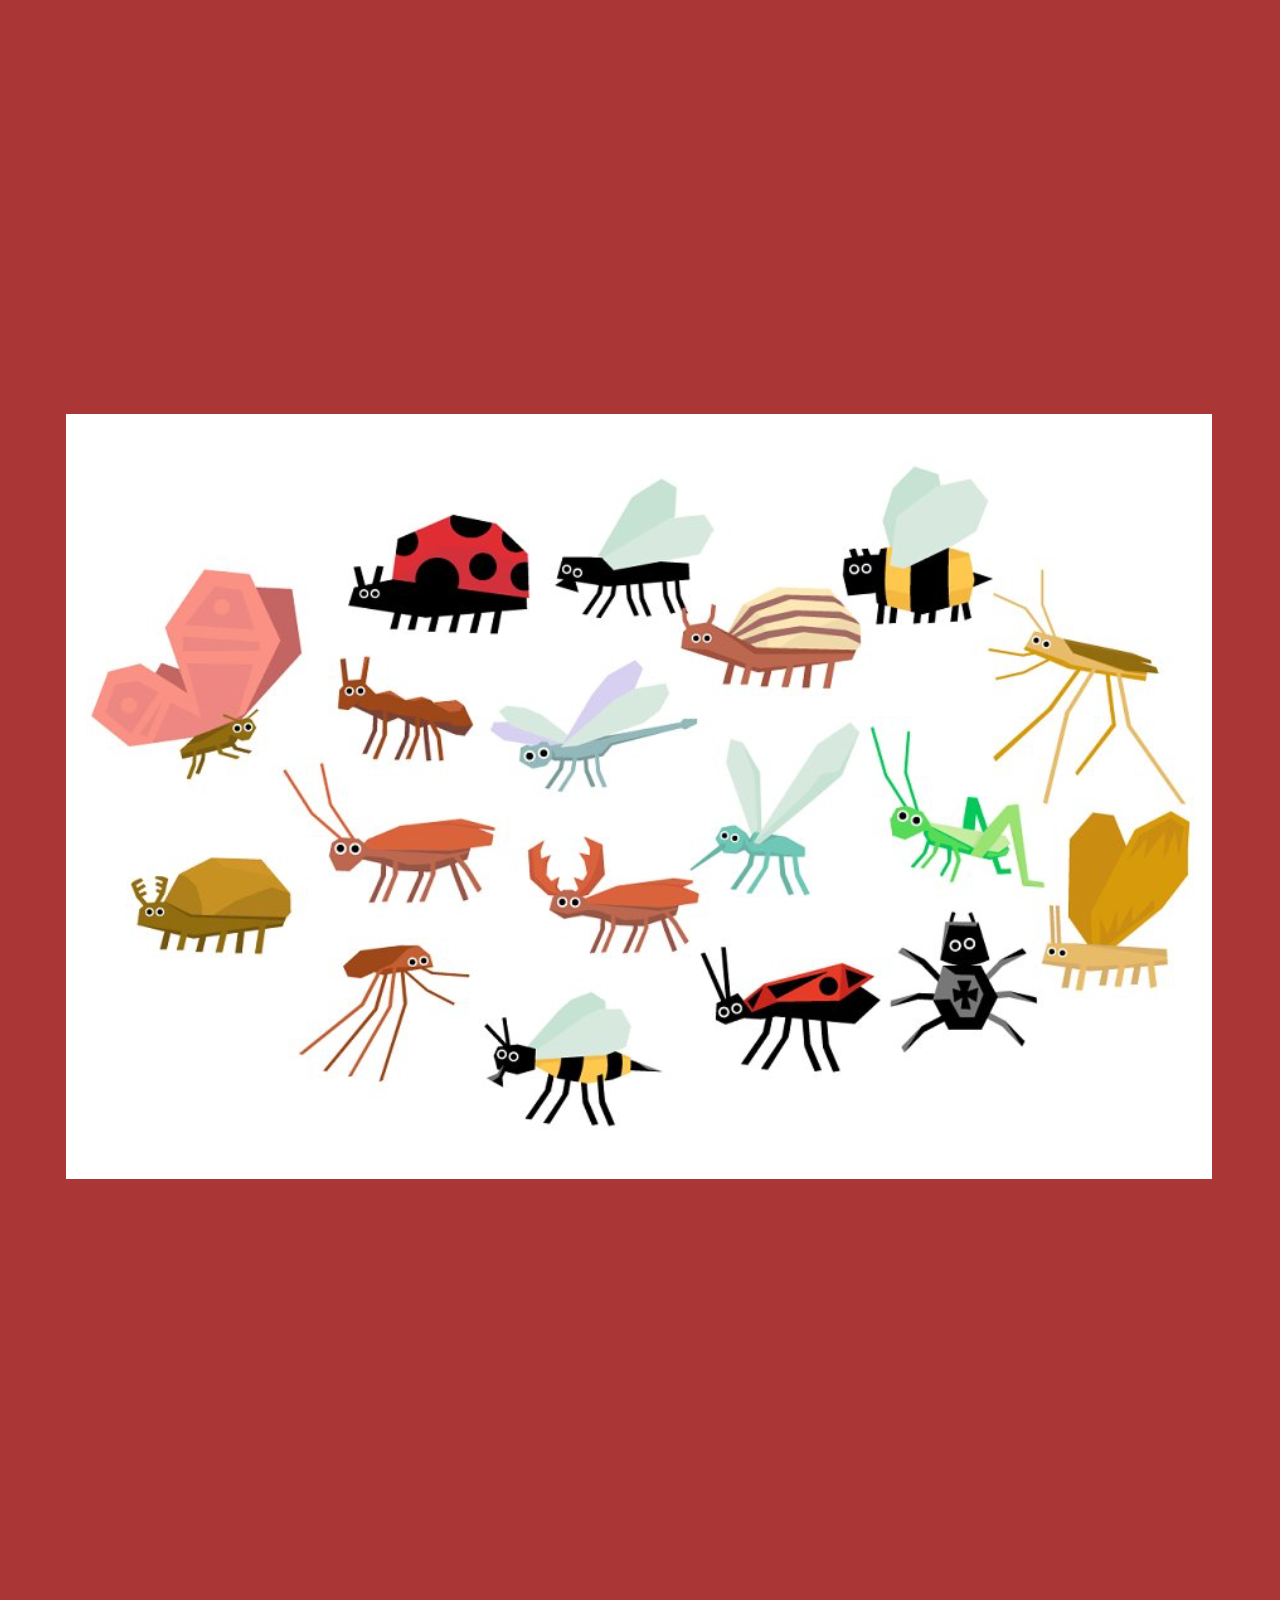 Collection of insects cartoon pinterest image.